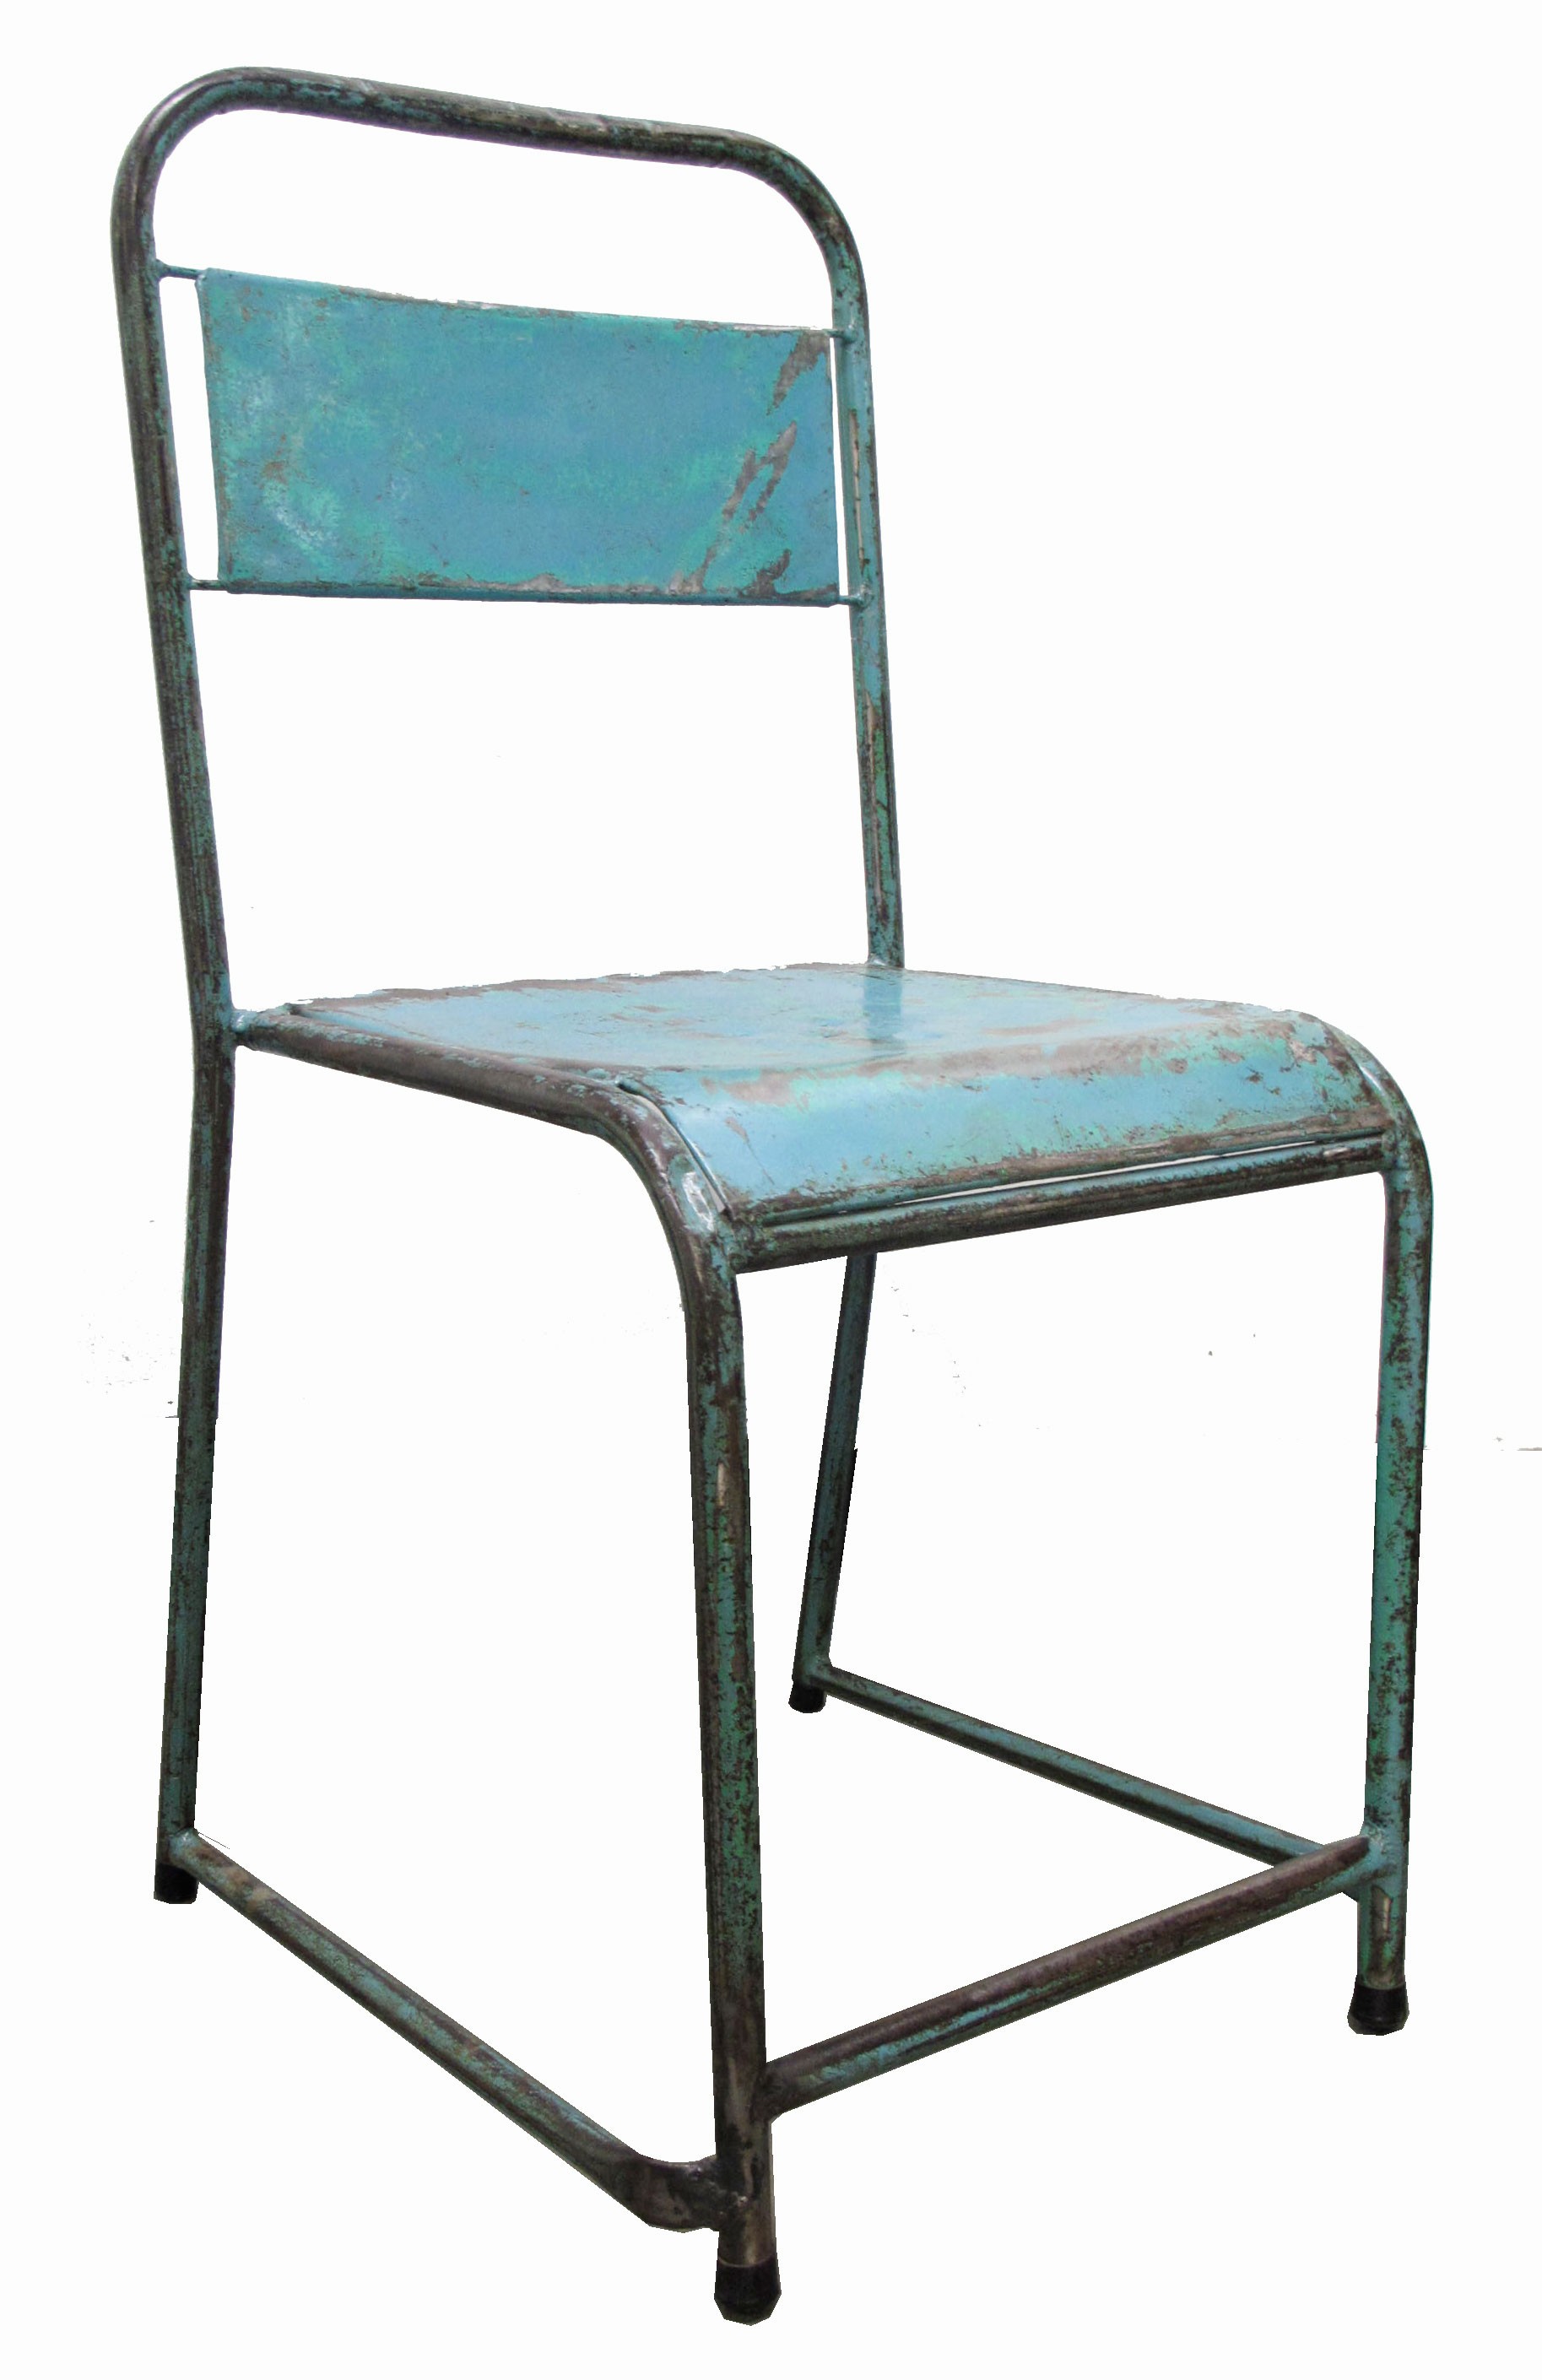 Teal with Patina Metal Garden Chair - Lost and Found